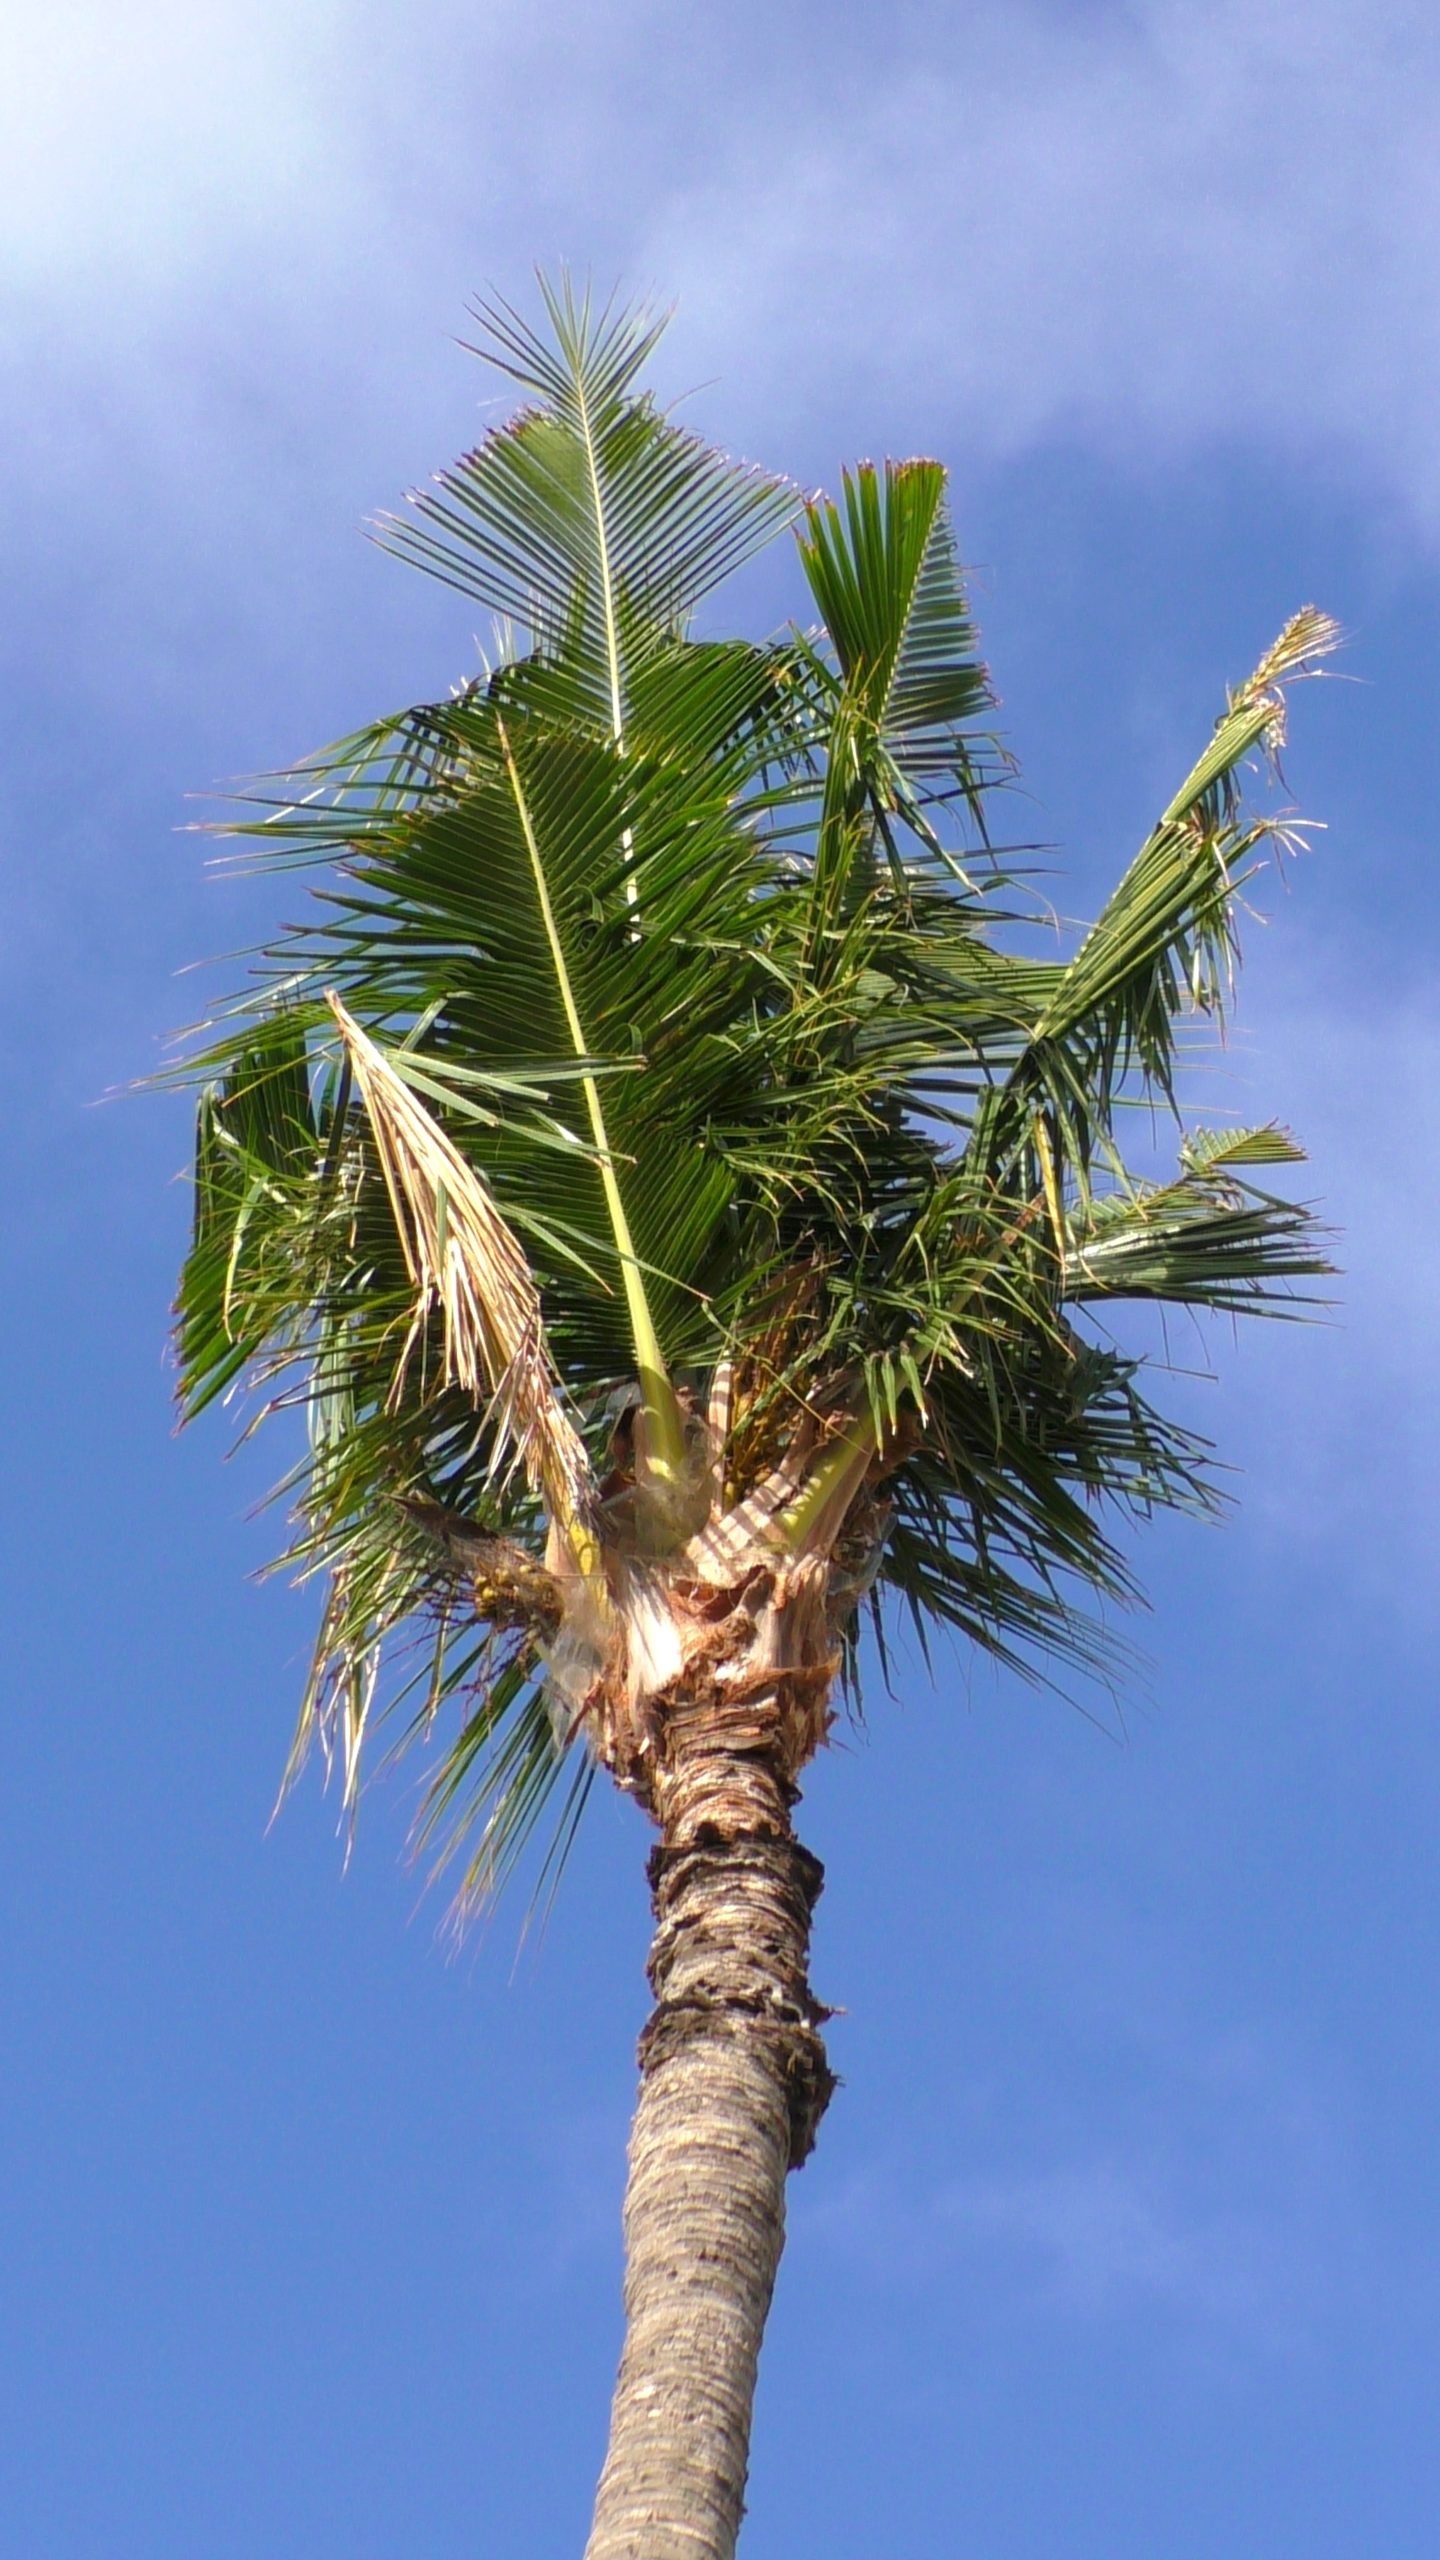 Crown of coconut palm with V-cut damage on palm fronds.